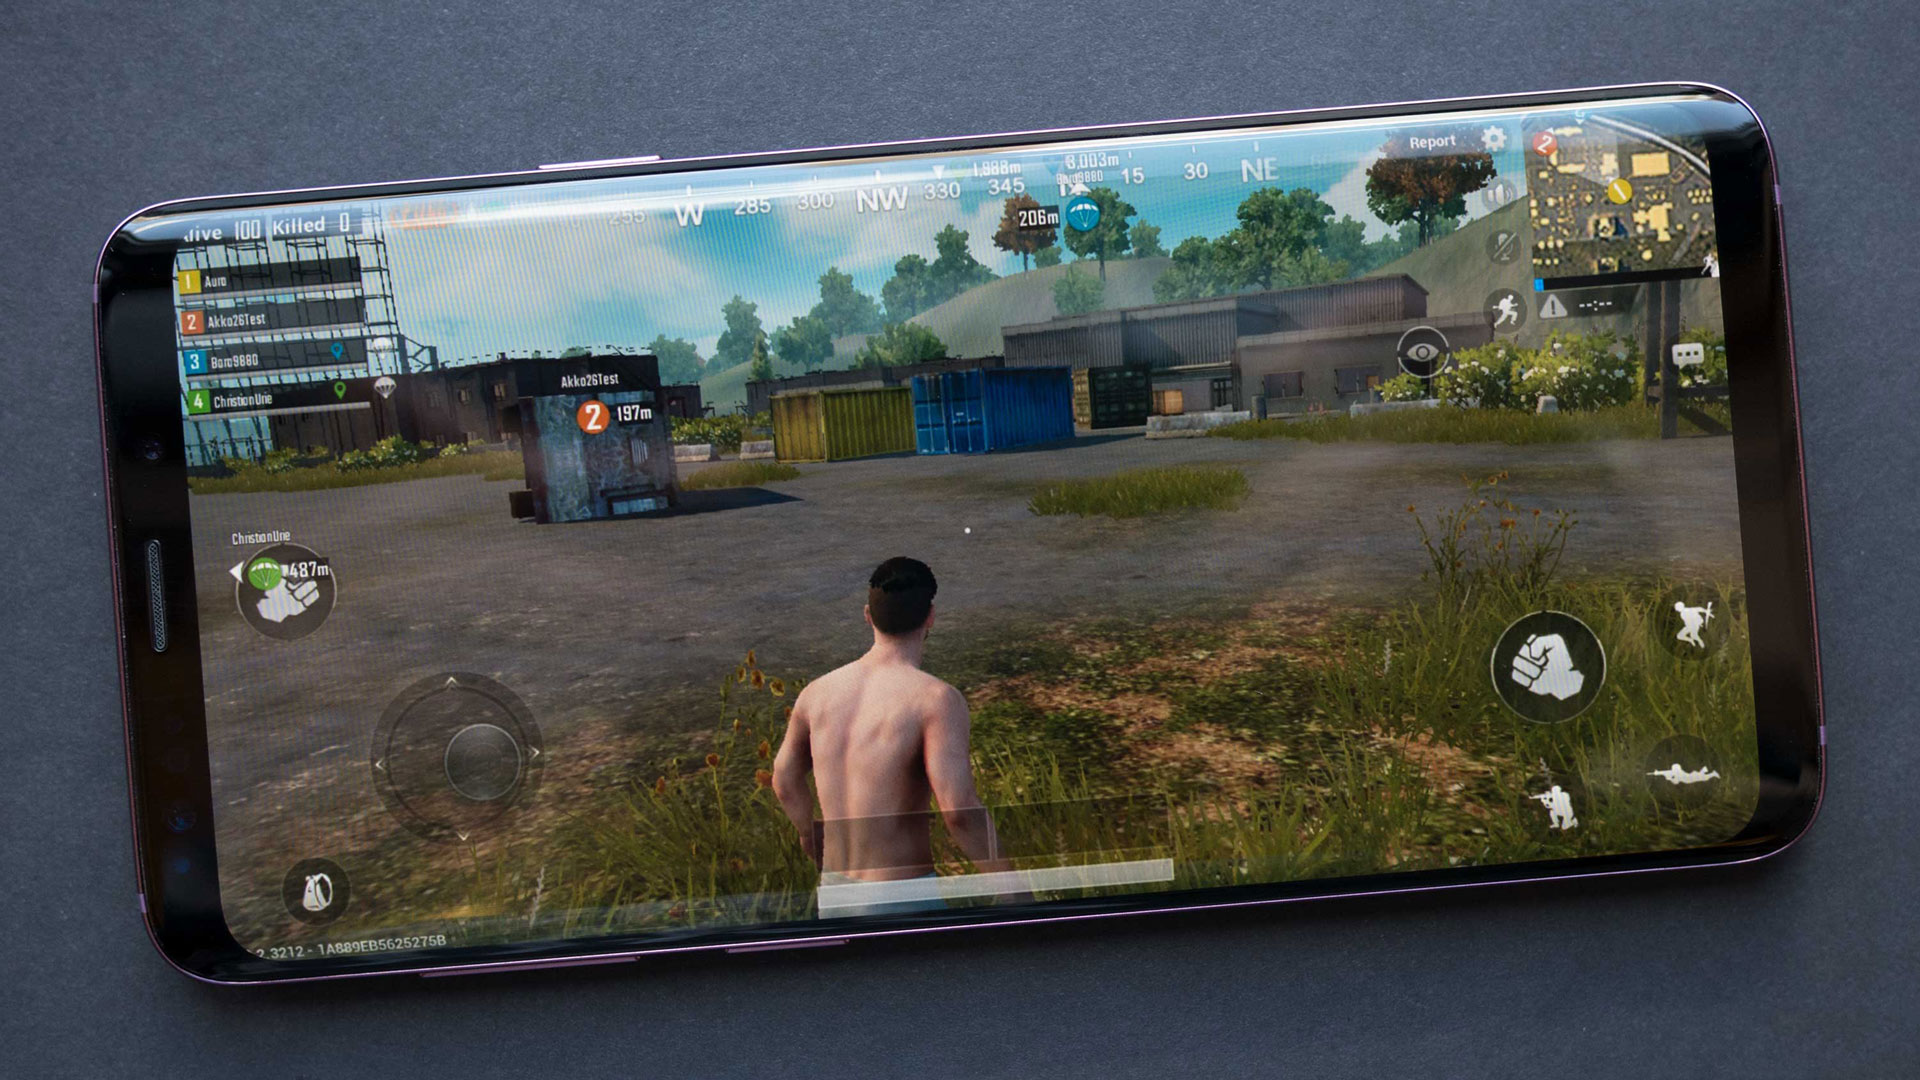 How to Change the Name in PUBG Mobile?